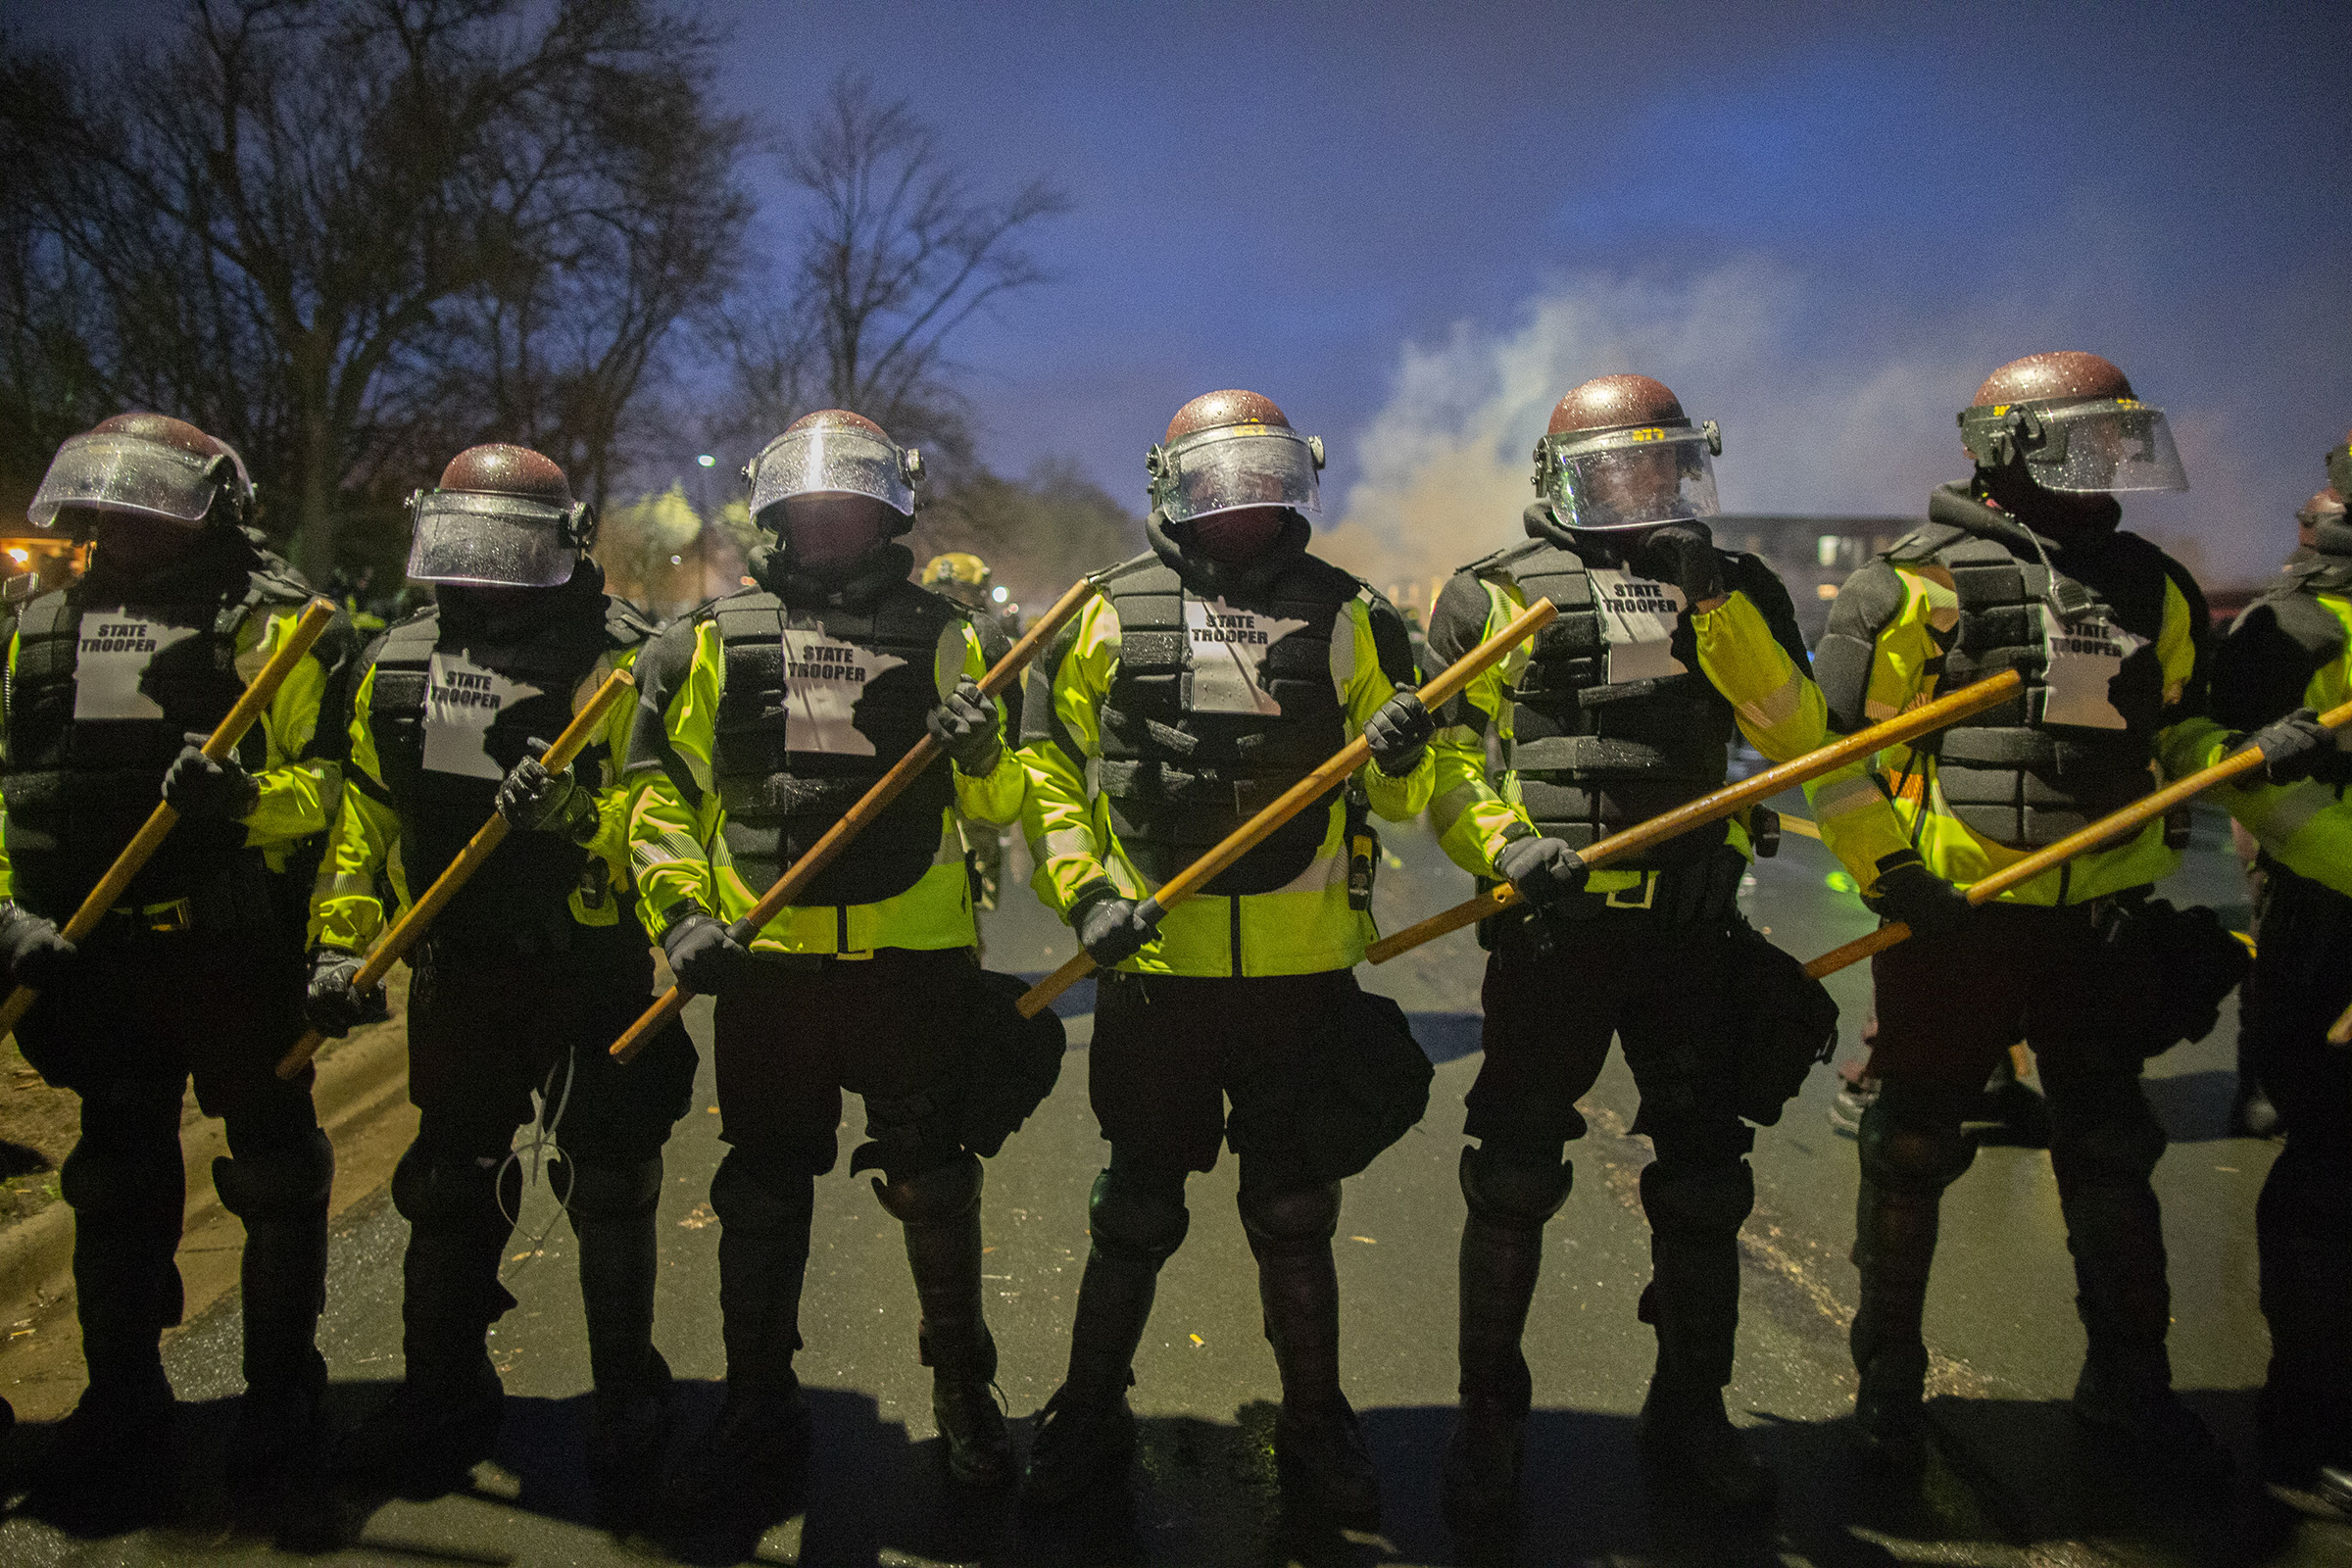 Tear gas rises from behind a line of Minnesota State Troopers as they block the road from anyone going back towards the Brooklyn Center police station where people protesting the police killing of Daunte Wright in Brooklyn Center, Minnesota, U.S., on April 13, 2021. (Christopher Mark Juhn—Anadolu Agency/Getty Images)